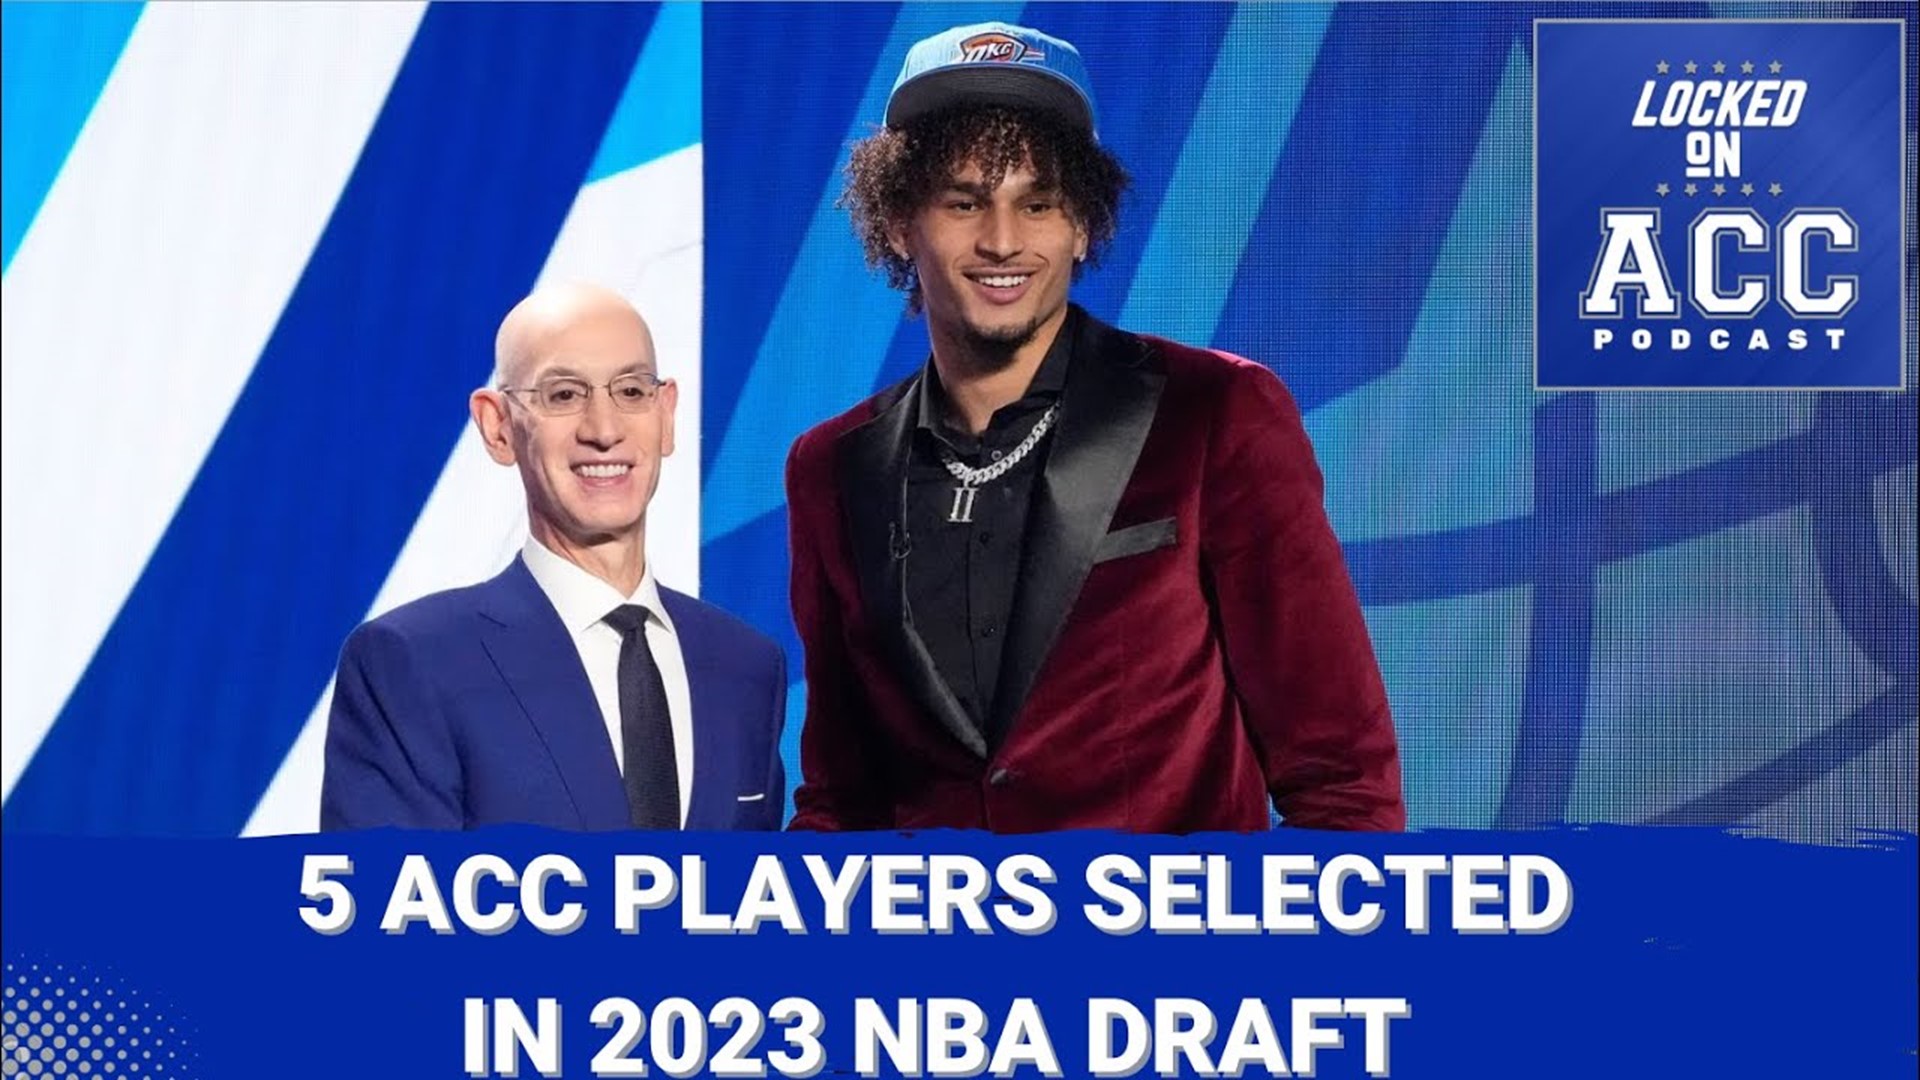 5 ACC Players were selected in the 2023 NBA Draft from Duke, Miami and Clemson. How will Lively II, Whitehead, Miller, Wong & Tyson's games translate to the league?